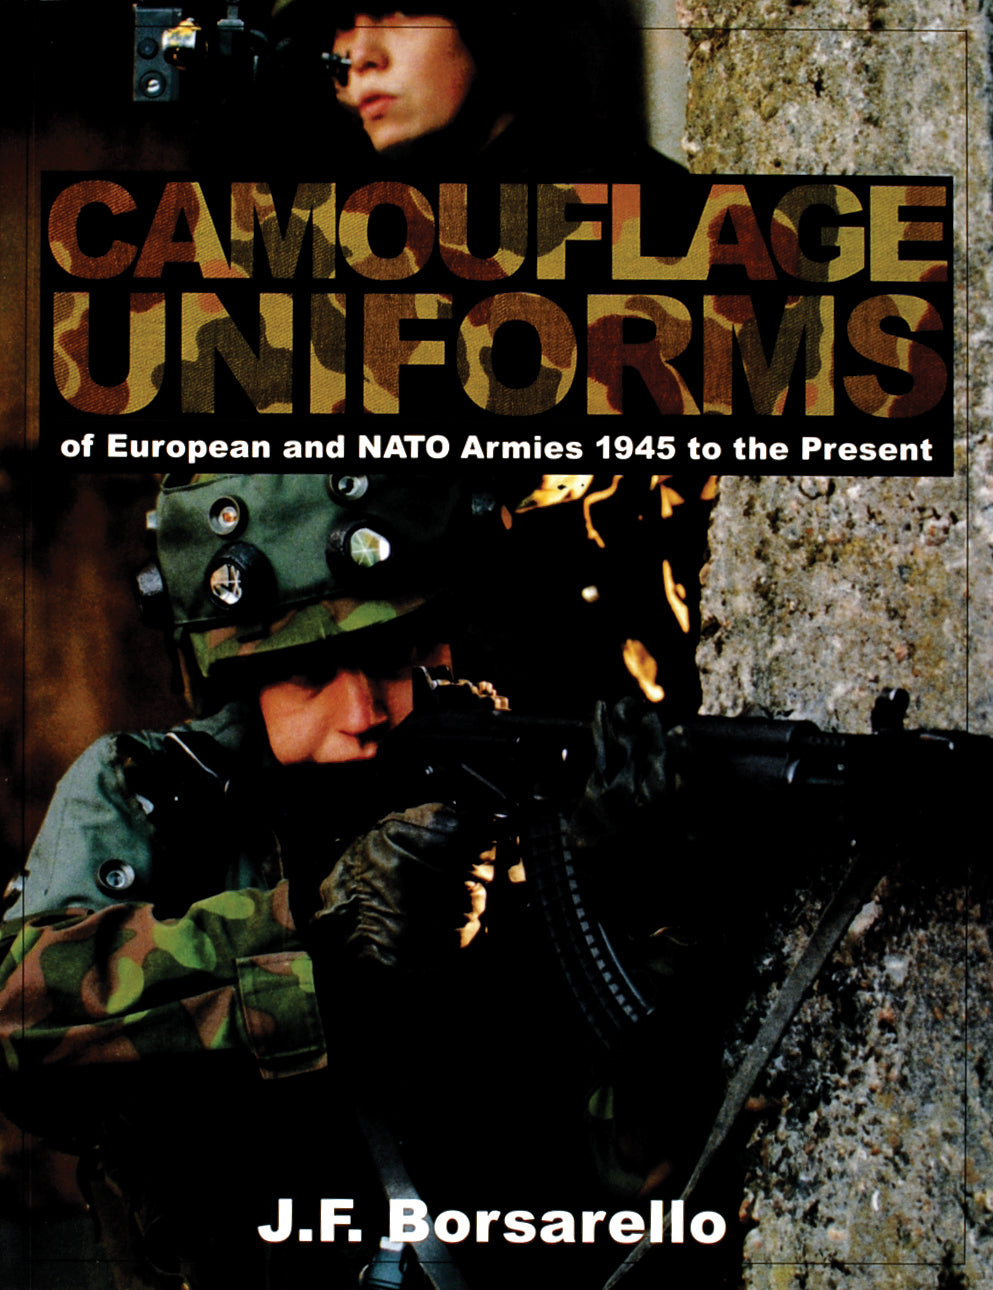 Camouflage Uniforms of European and NATO Armies